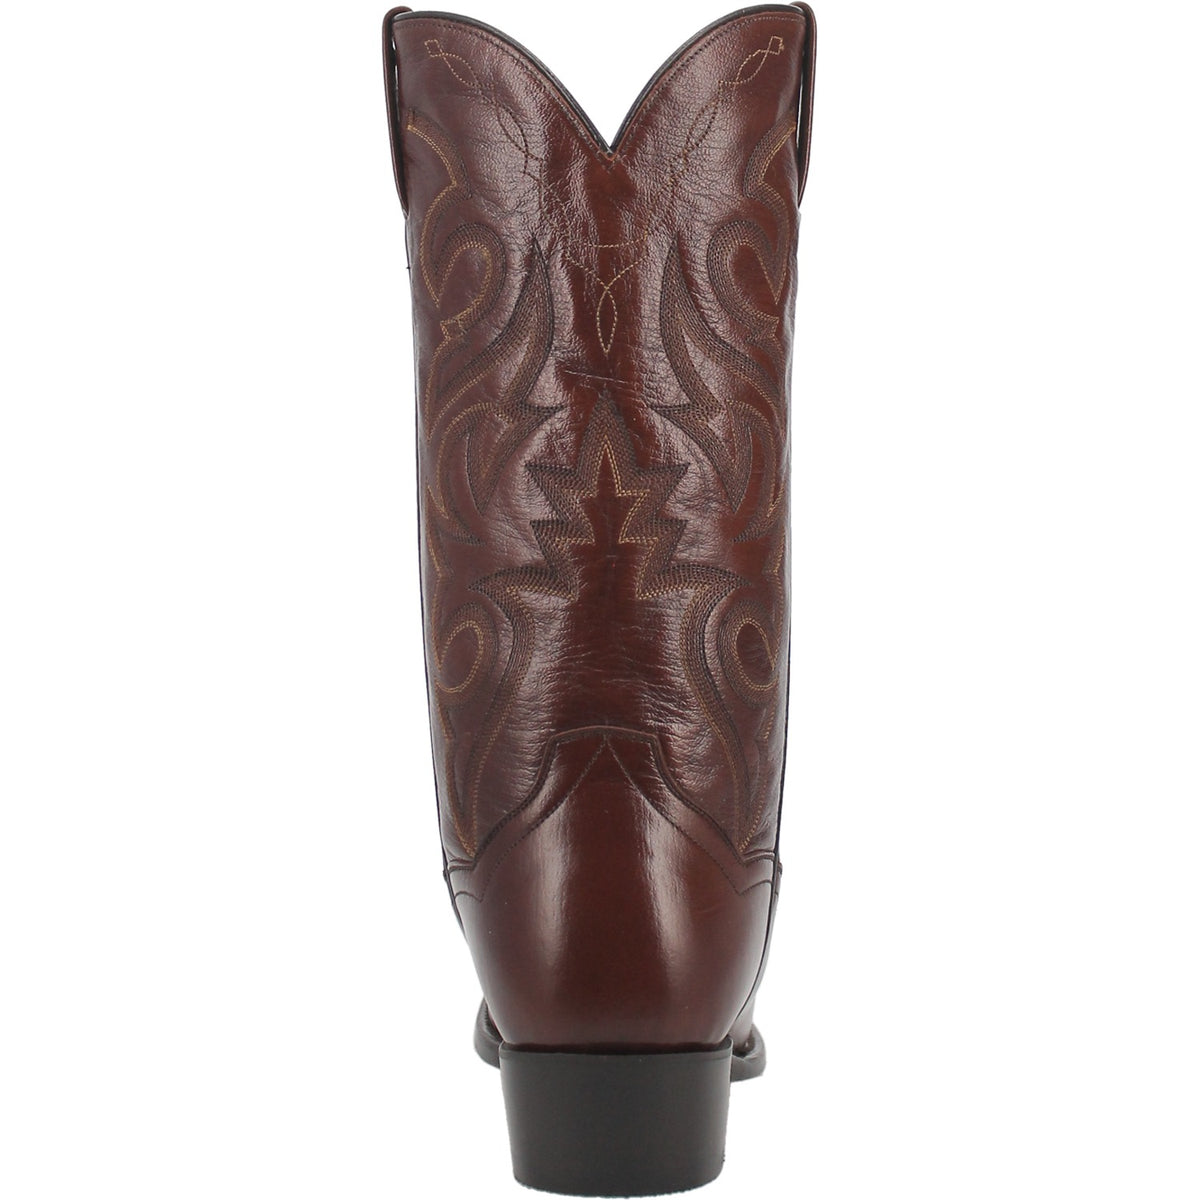 MILWAUKEE LEATHER BOOT Cover